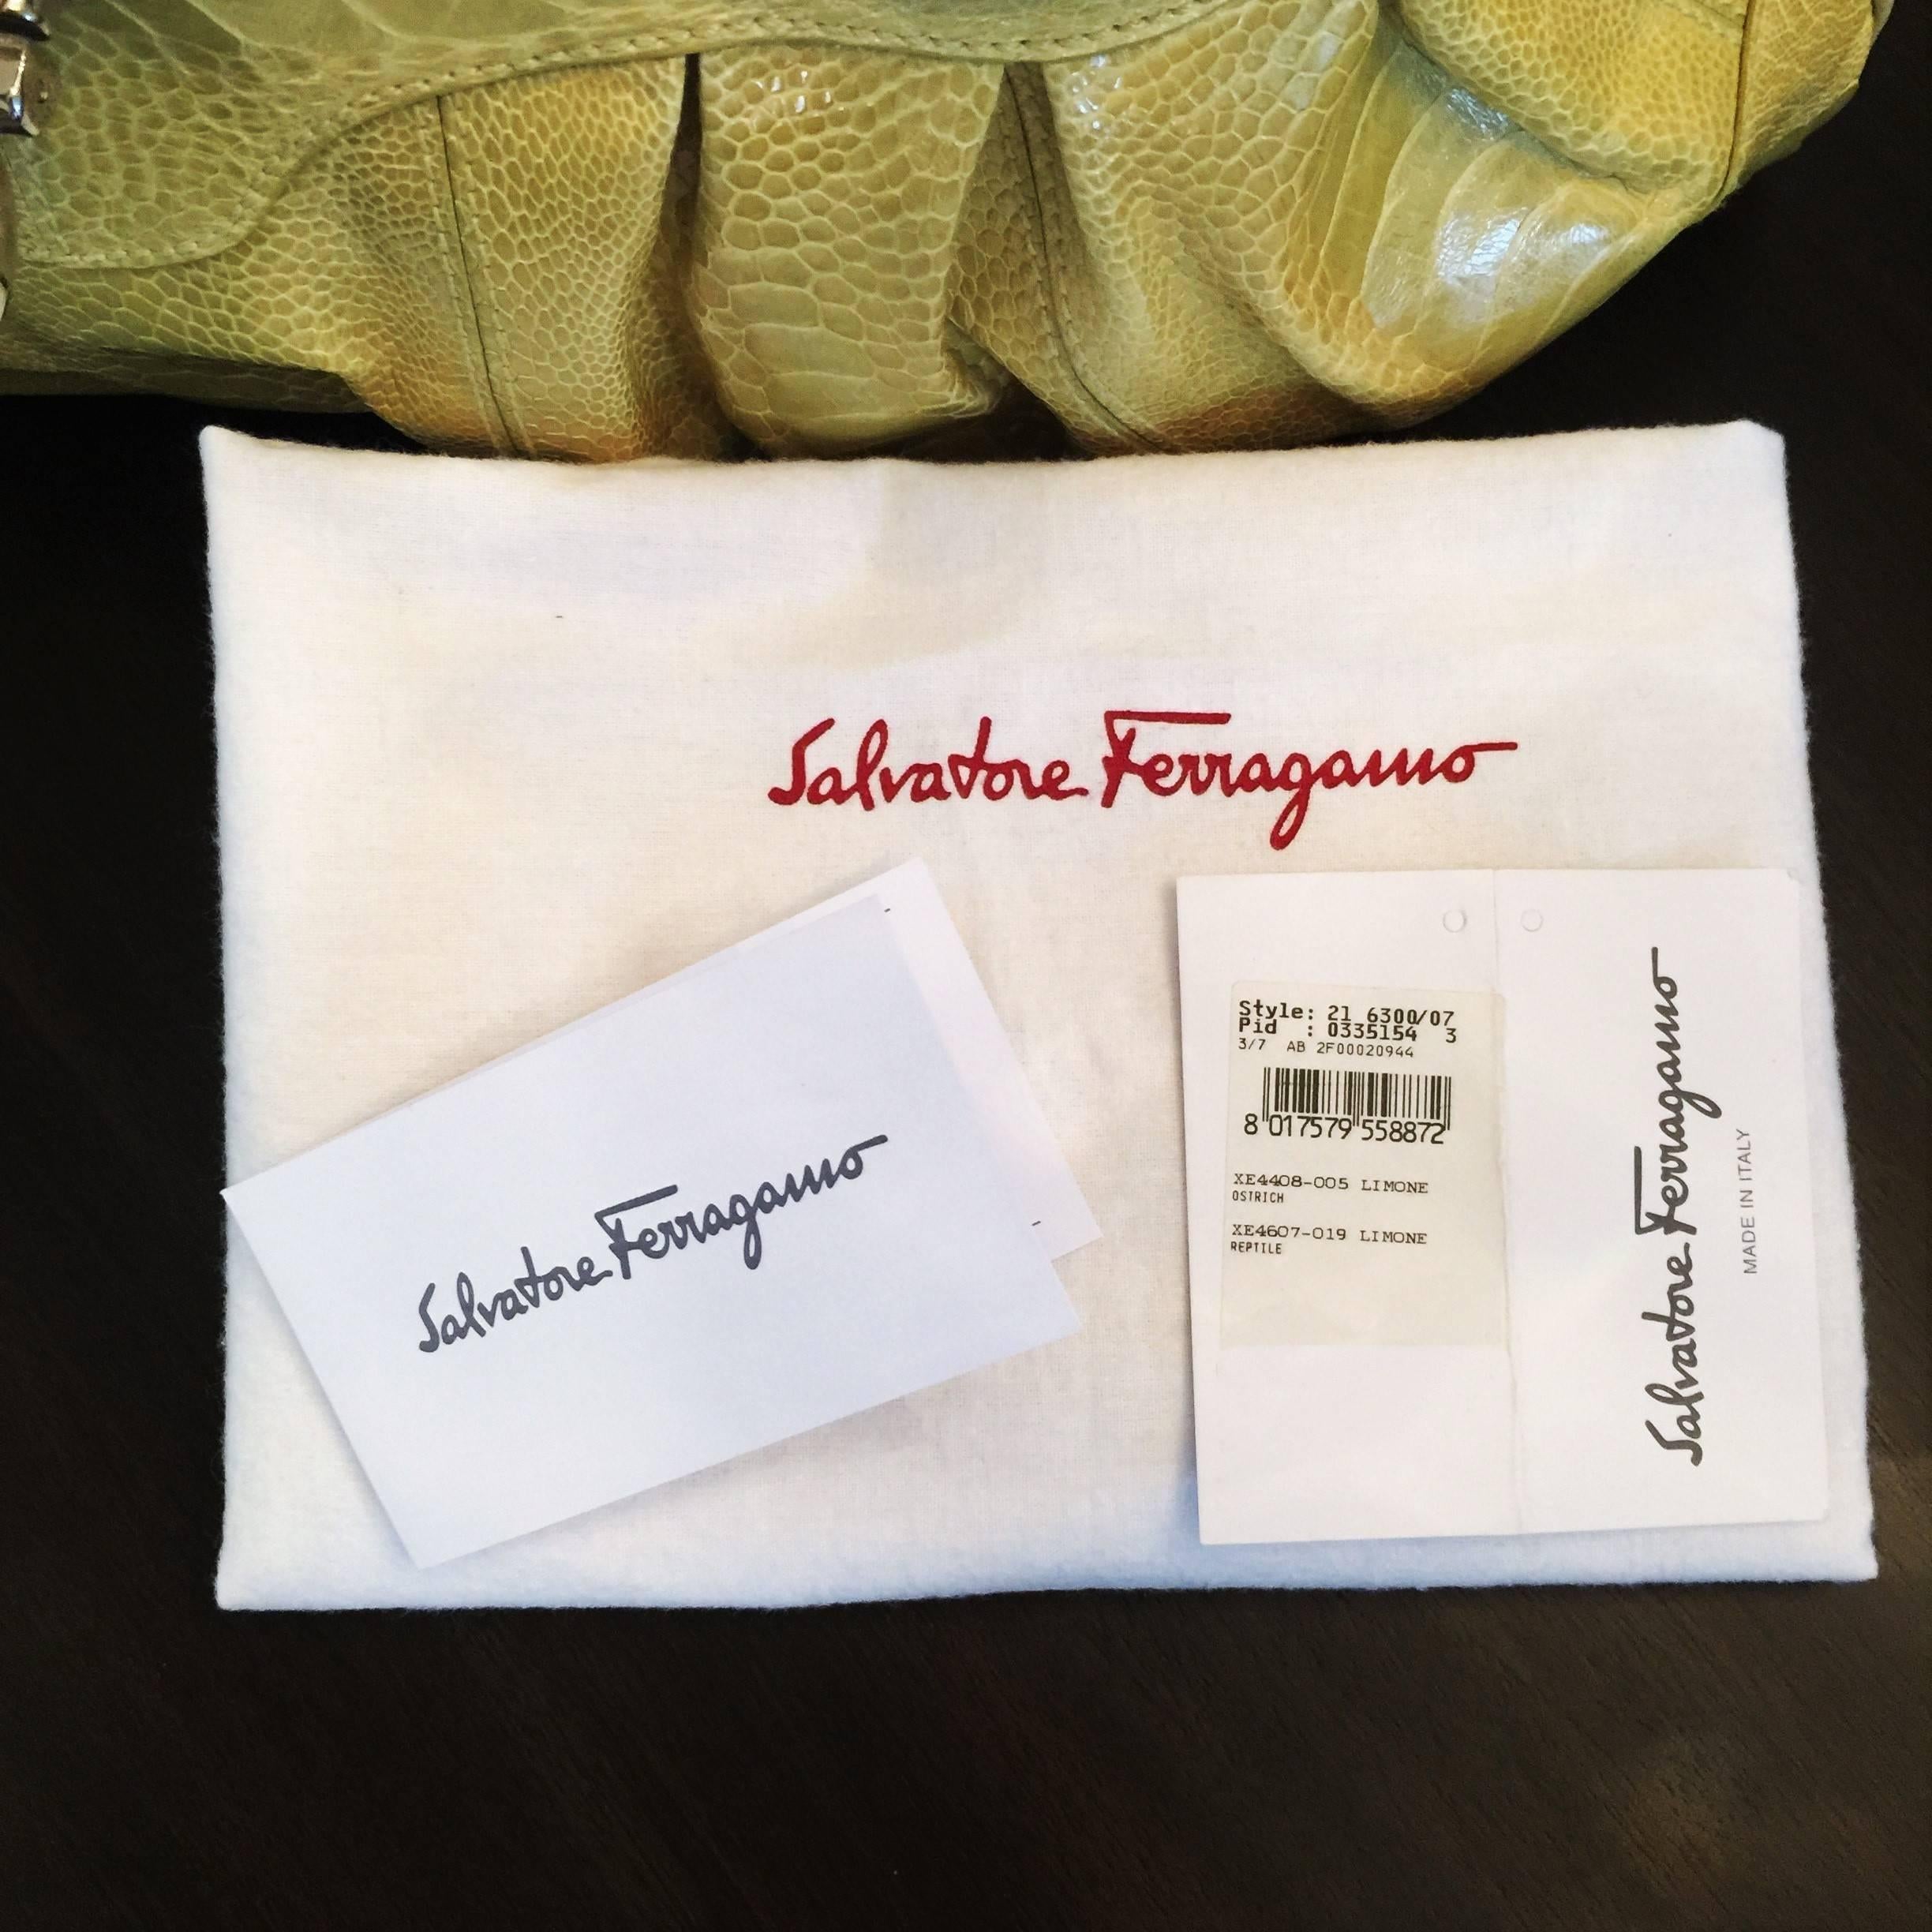 New Extra Large Salvatore Ferragamo Ostrich Leg Bag With Tags 16